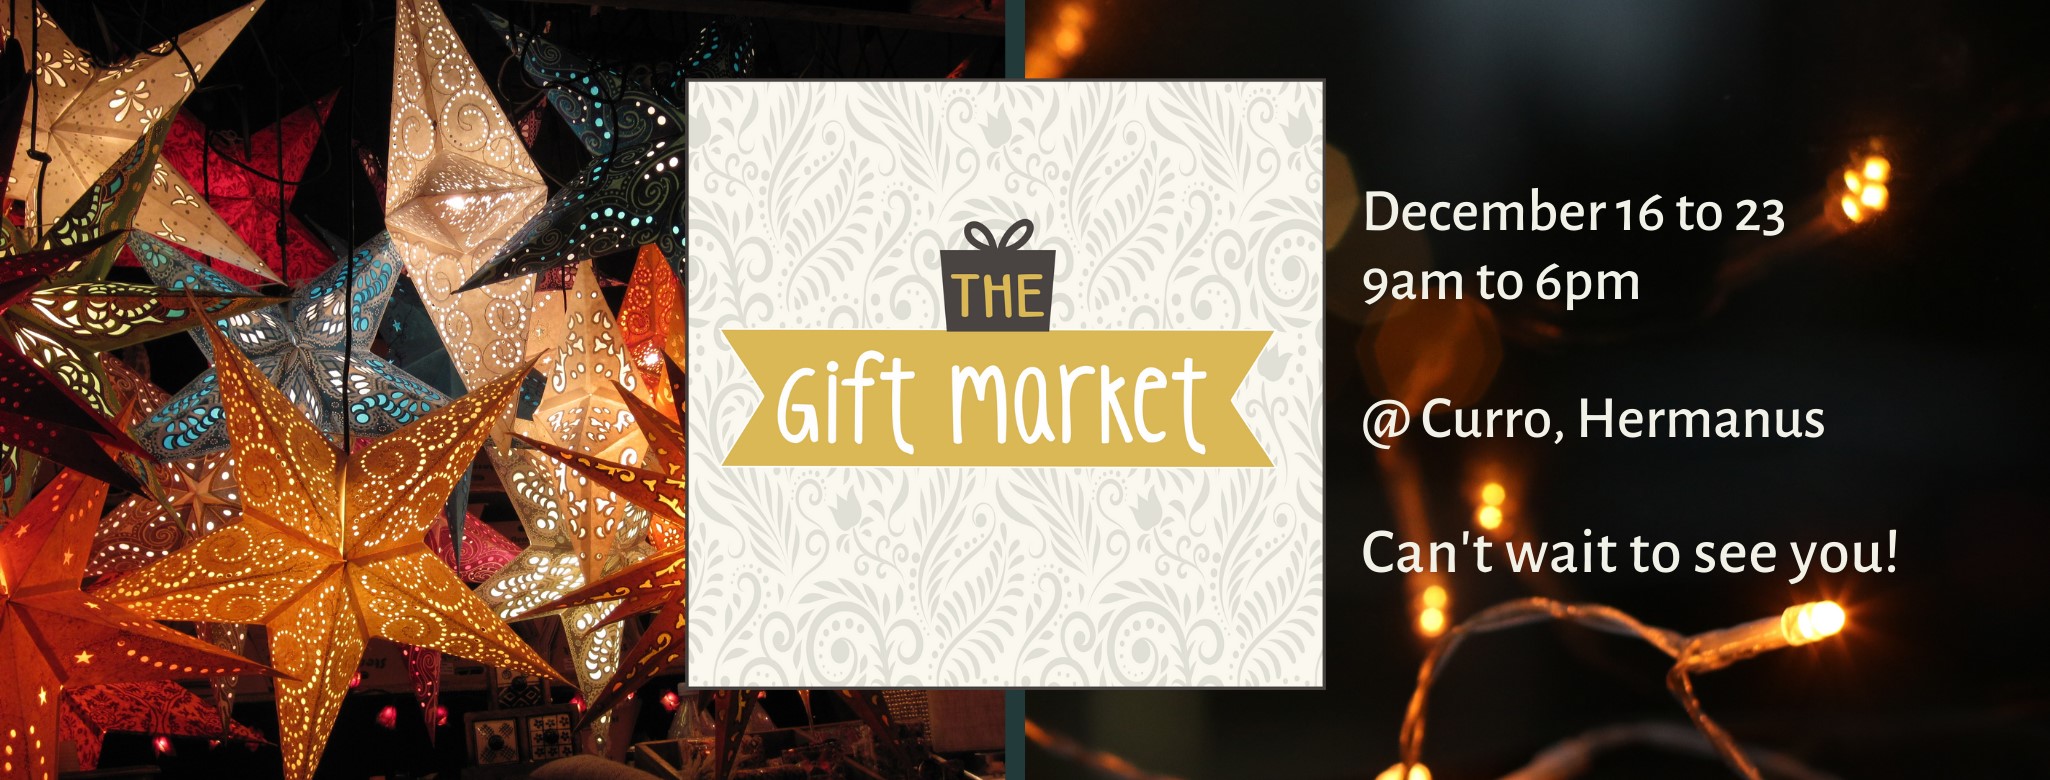 The Gift Market, Christmas shopping - 16th to 23rd DEC 2020 (9am to 6pm) - 100 exhibitors - at CURRO school, Hermanus